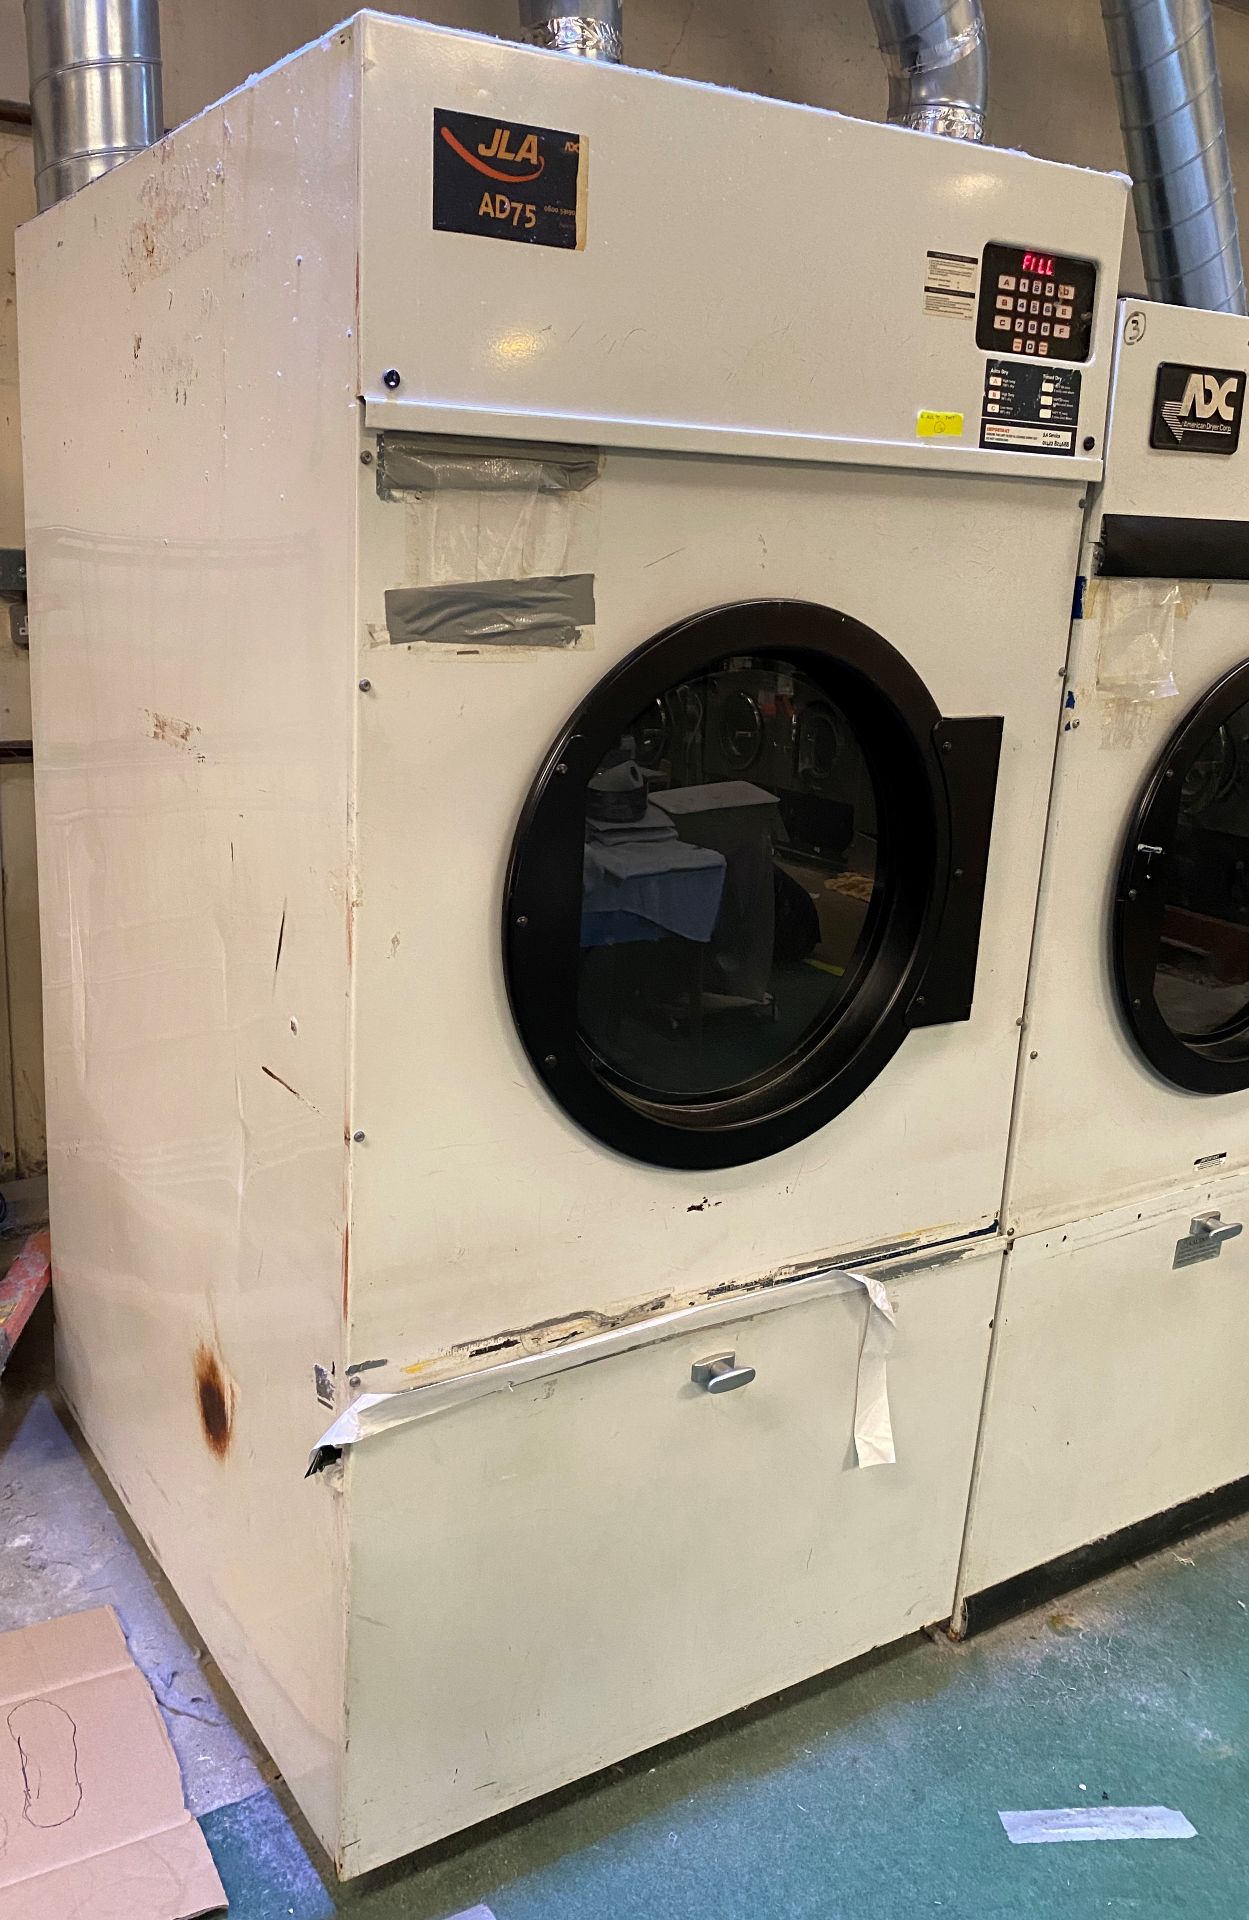 ADC American Dryer Corporation ADG75THS 75lb Gas Tumble Dryer - single phase - Image 2 of 5